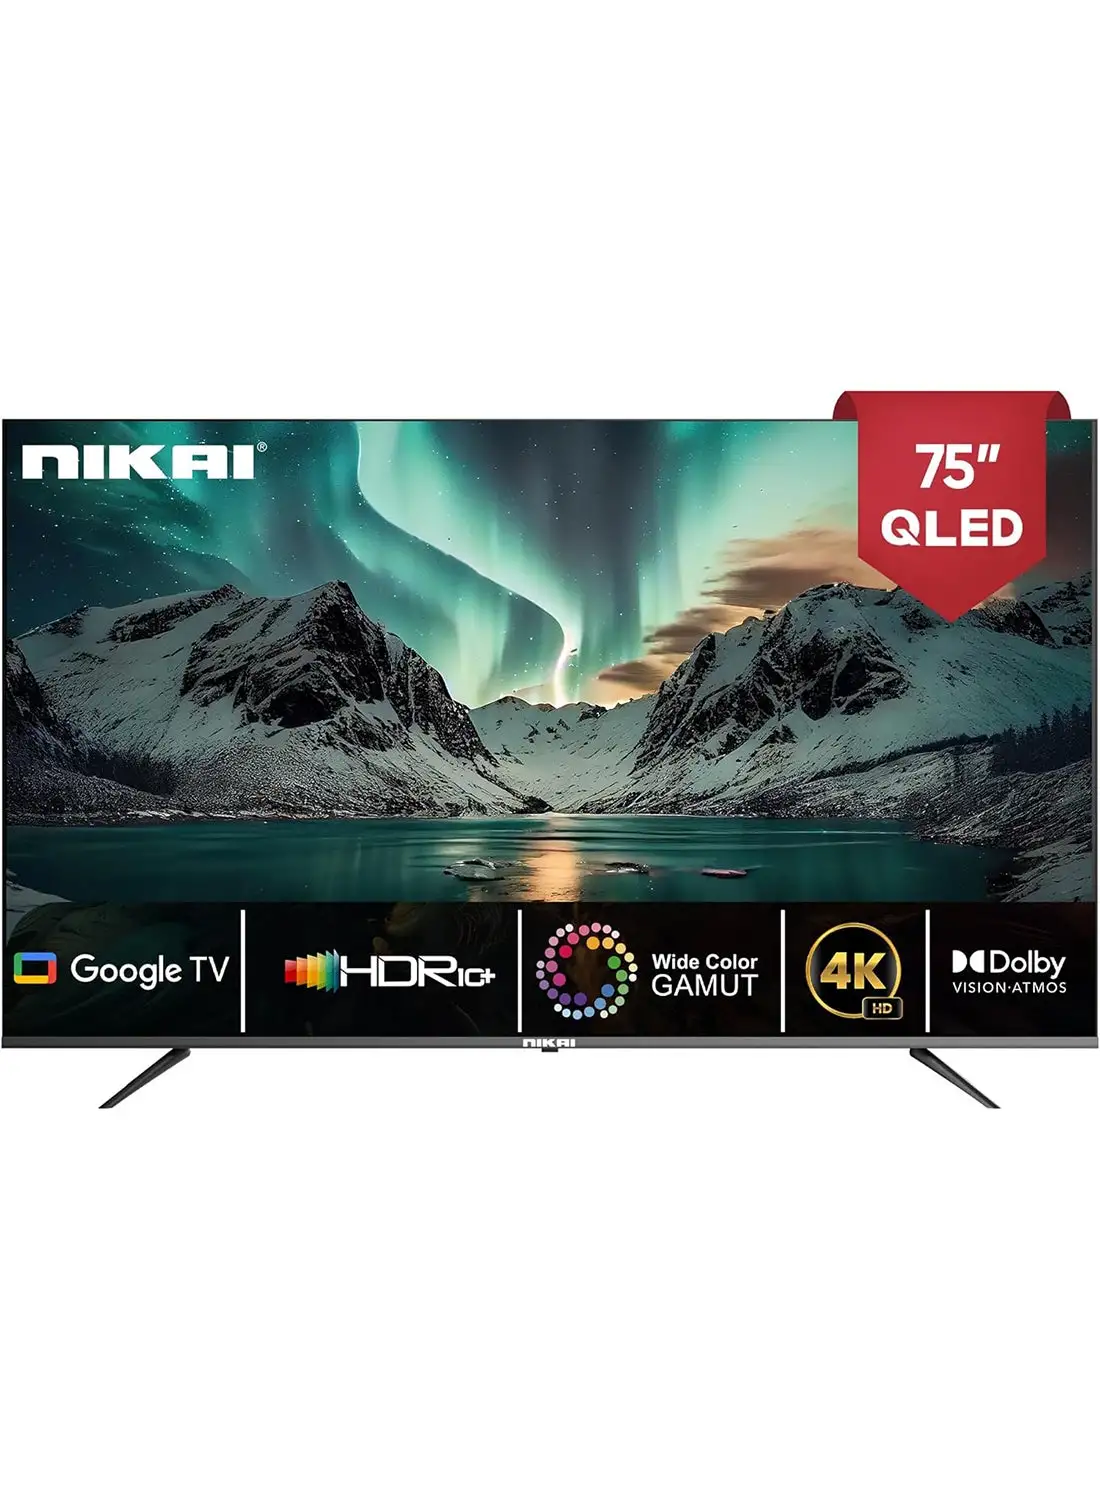 NIKAI Pro 75 Inch QLED 4K Smart Google TV, Andrioid TV OS, Voice Search, Youtube, Netflix, Shahid, Wide Color Gamut, 3860x2160 Pixels, HDR10+, Dolby Atmos, ChromeCast Bulit-In NPROG75QLED Black